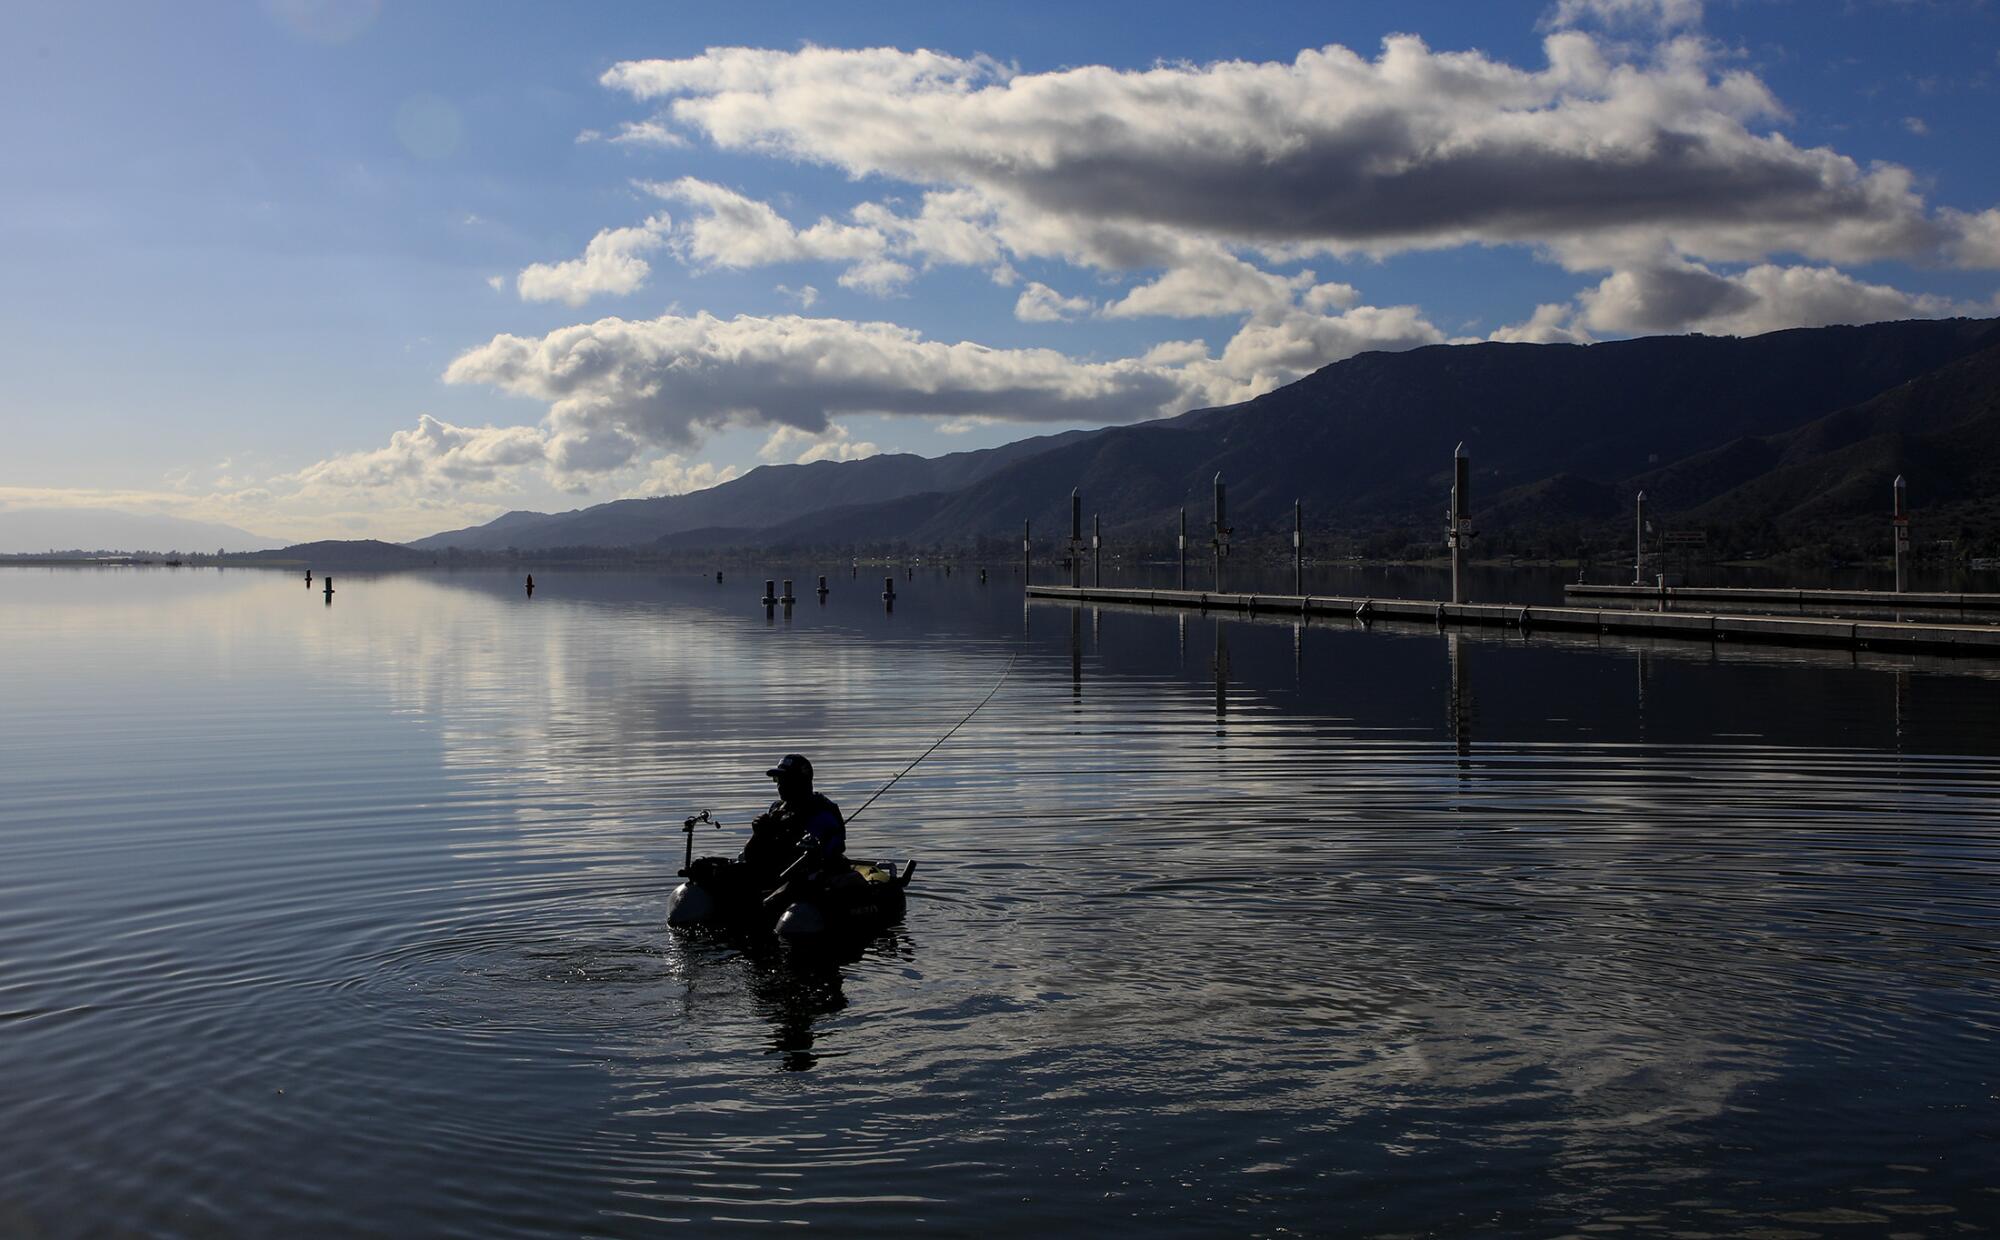 Fisherman Johnathan O. Skinner floats out to his favorite spot on Lake Elsinore, trying to catch a catfish or a bass.